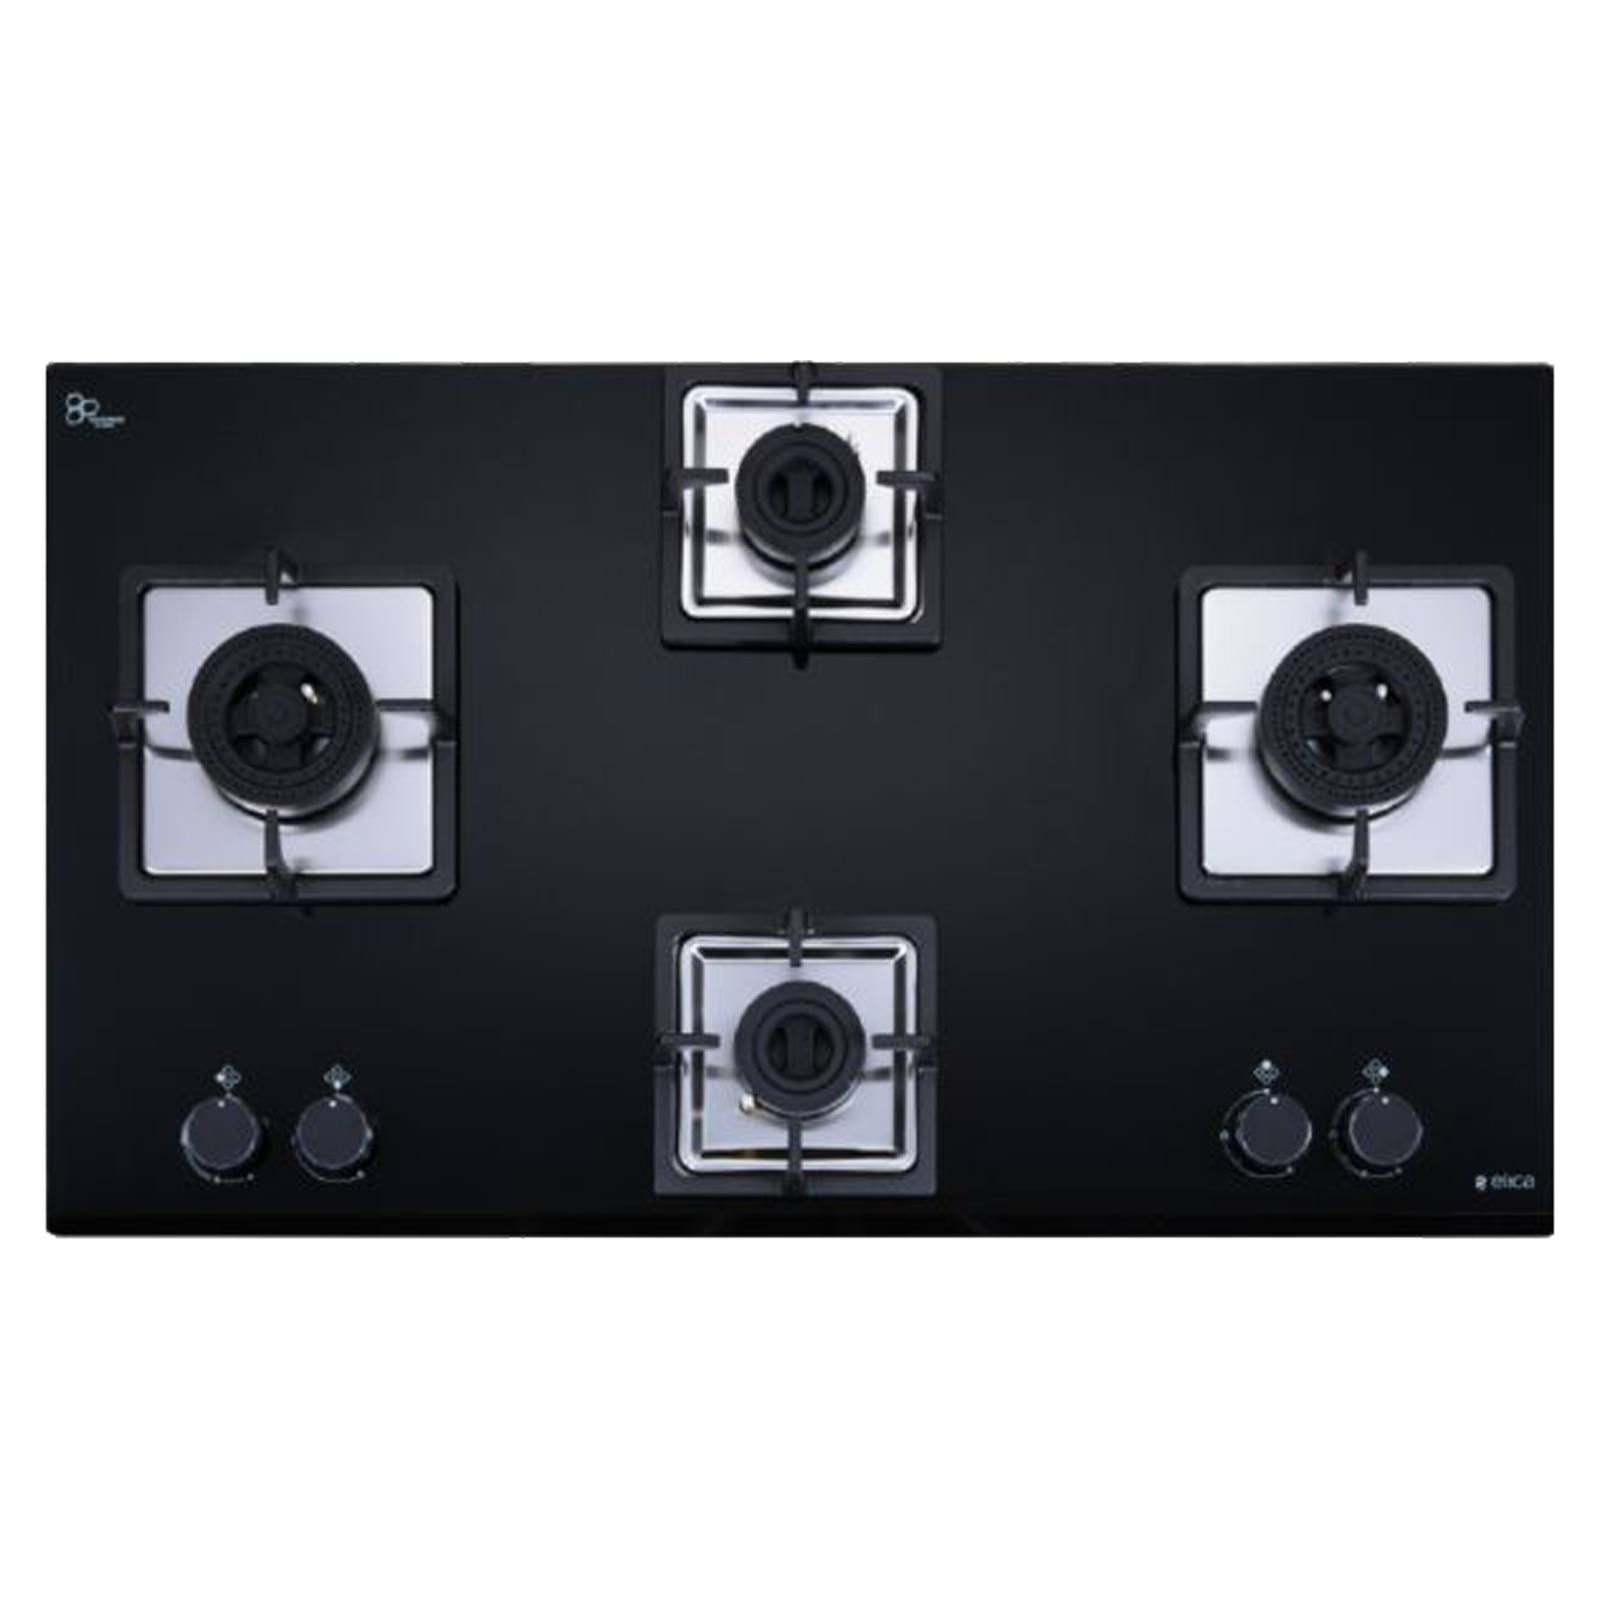 elica IND FLEXI AB DFS Series 4 Burner Automatic Hob (Battery Operated, Black)